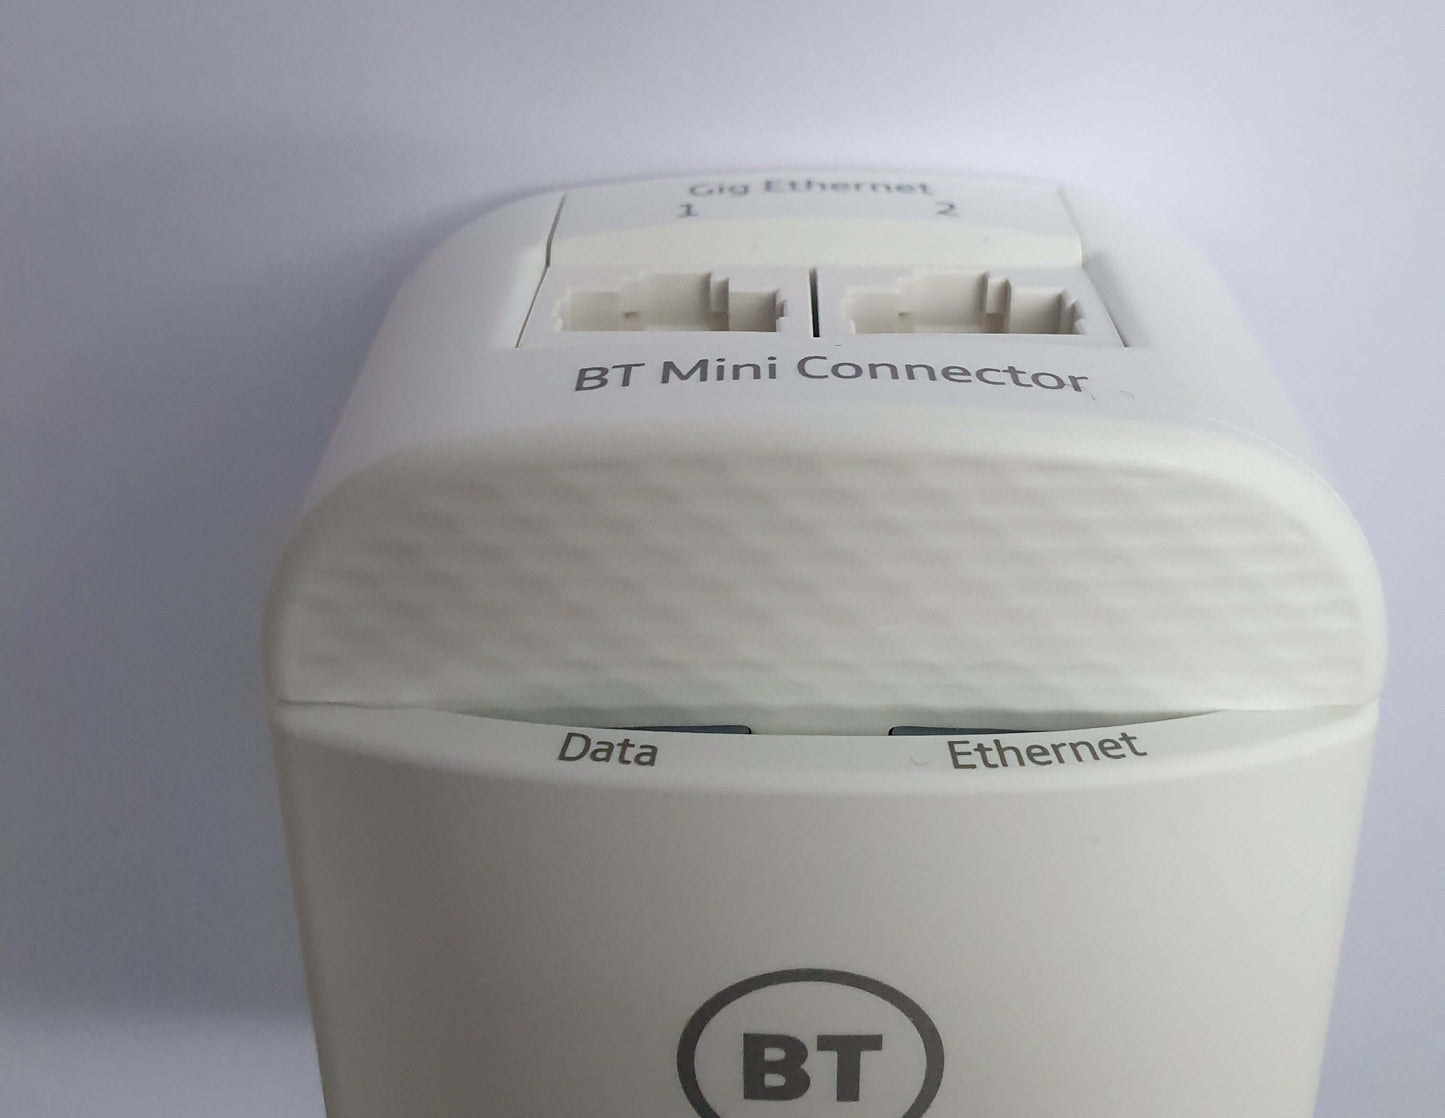 BT Mini Connector Kit Twin Powerline Network 1GB Gigabit Ethernet Adapters Top View showing Data and Ethernet Lights